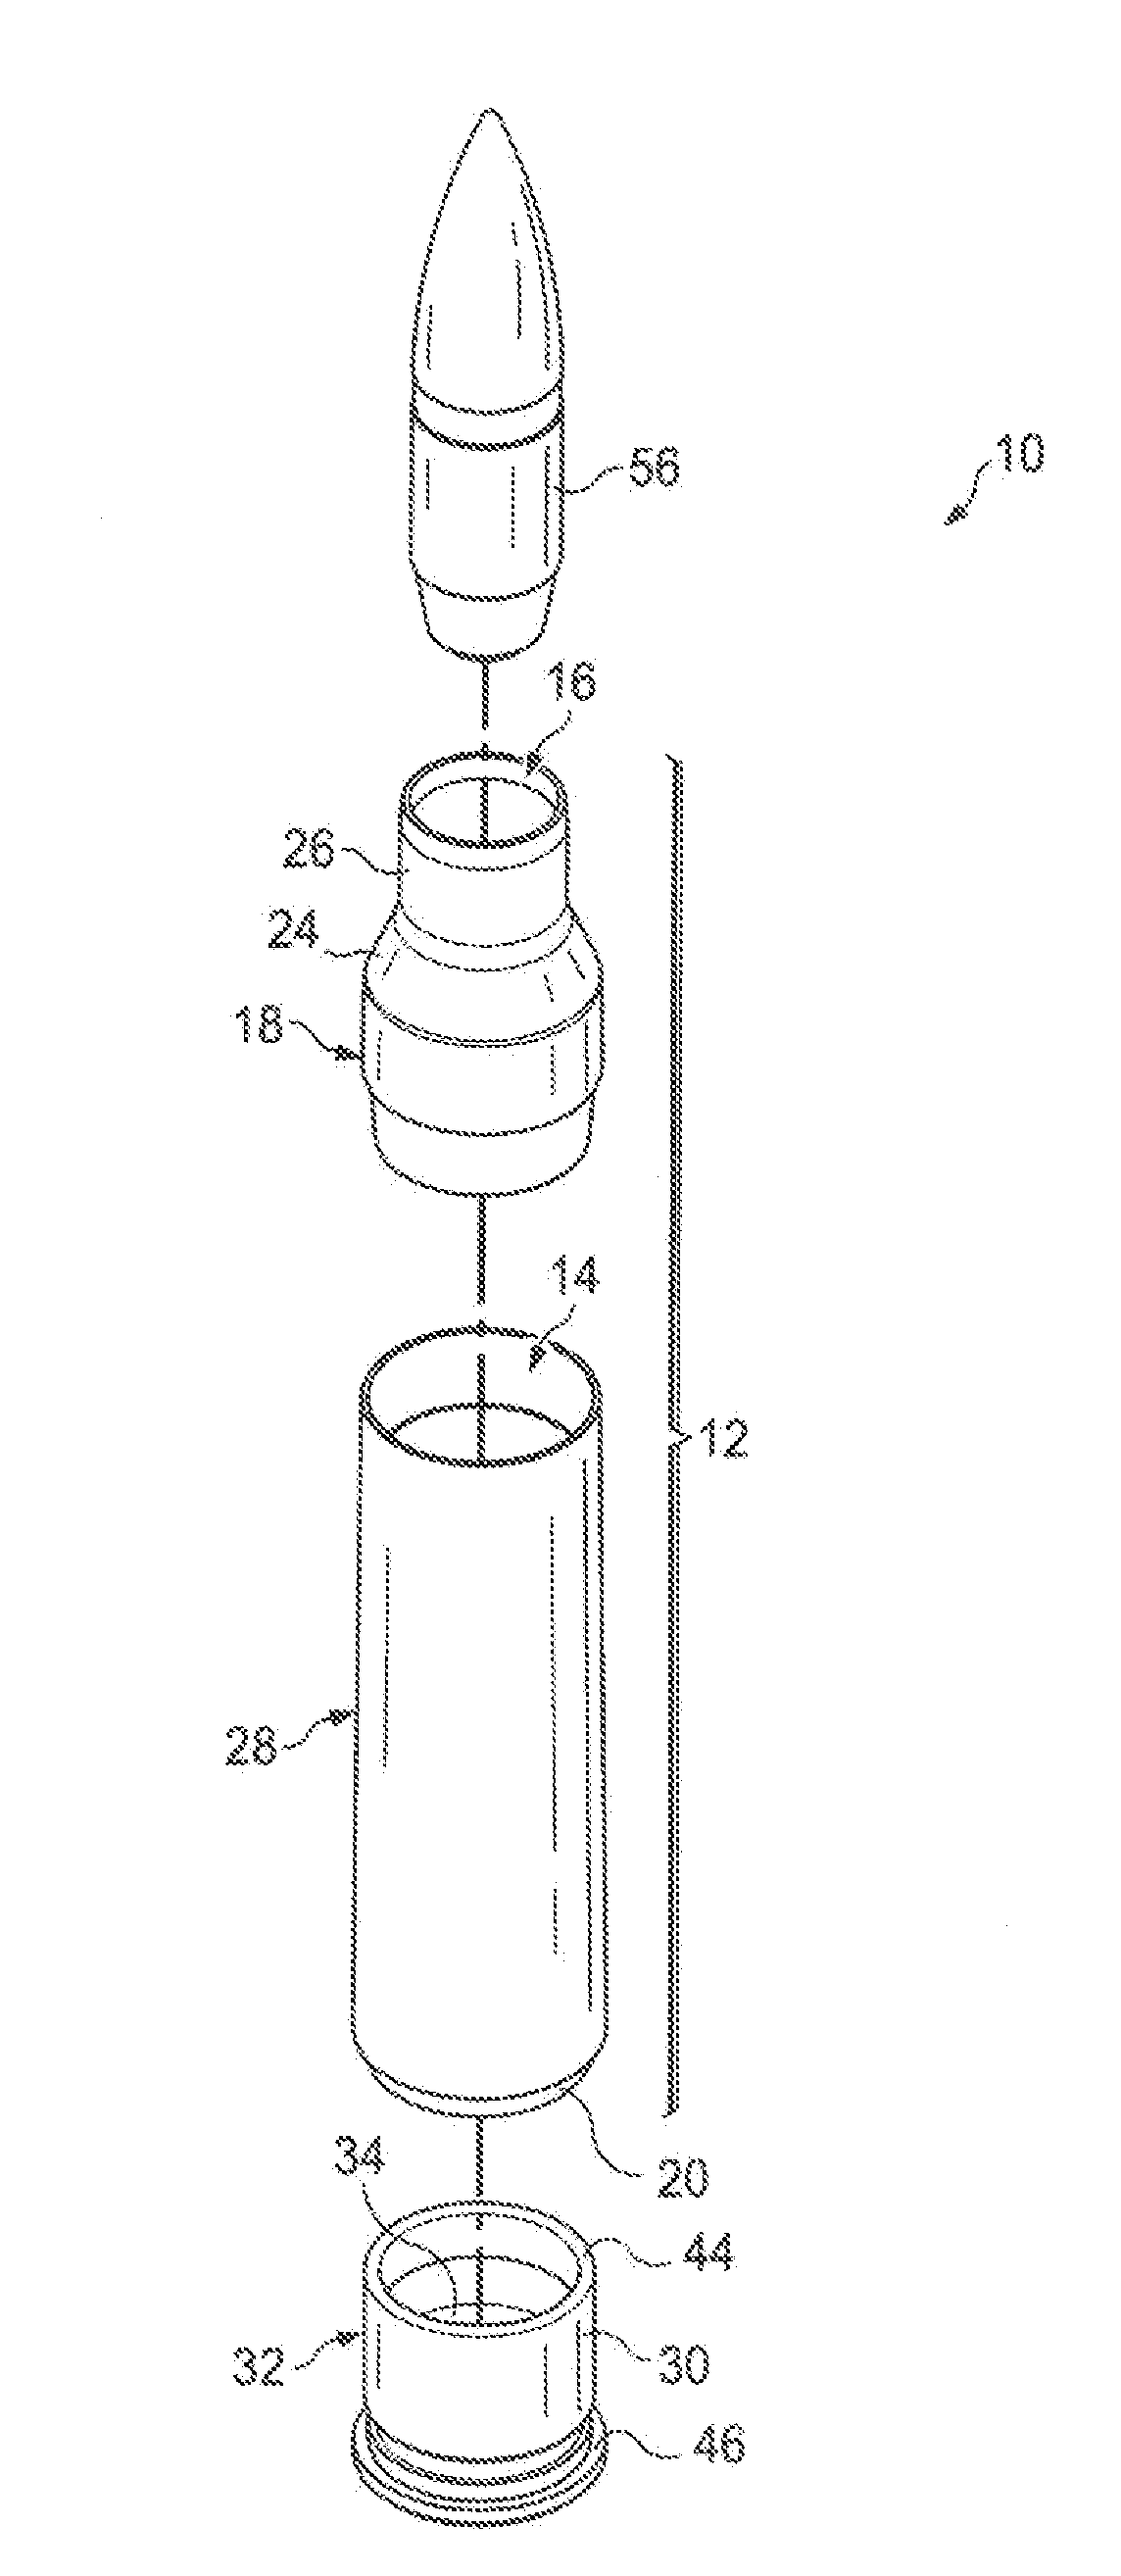 Method of making a polymeric subsonic ammunition cartridge